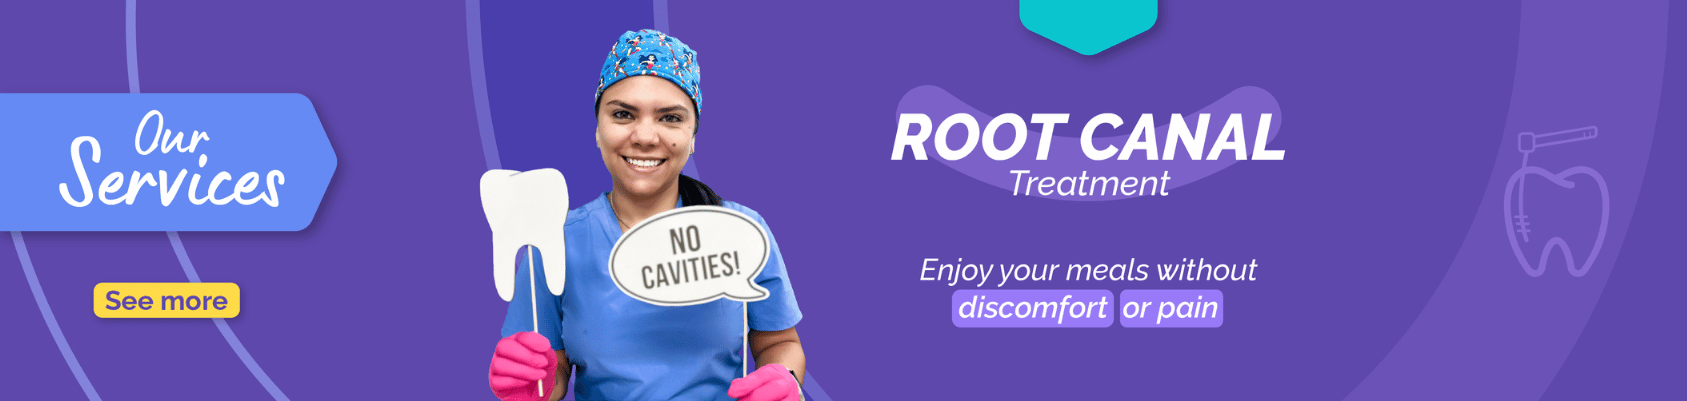 Root Canal Treatment, RCT, Endodontic Services